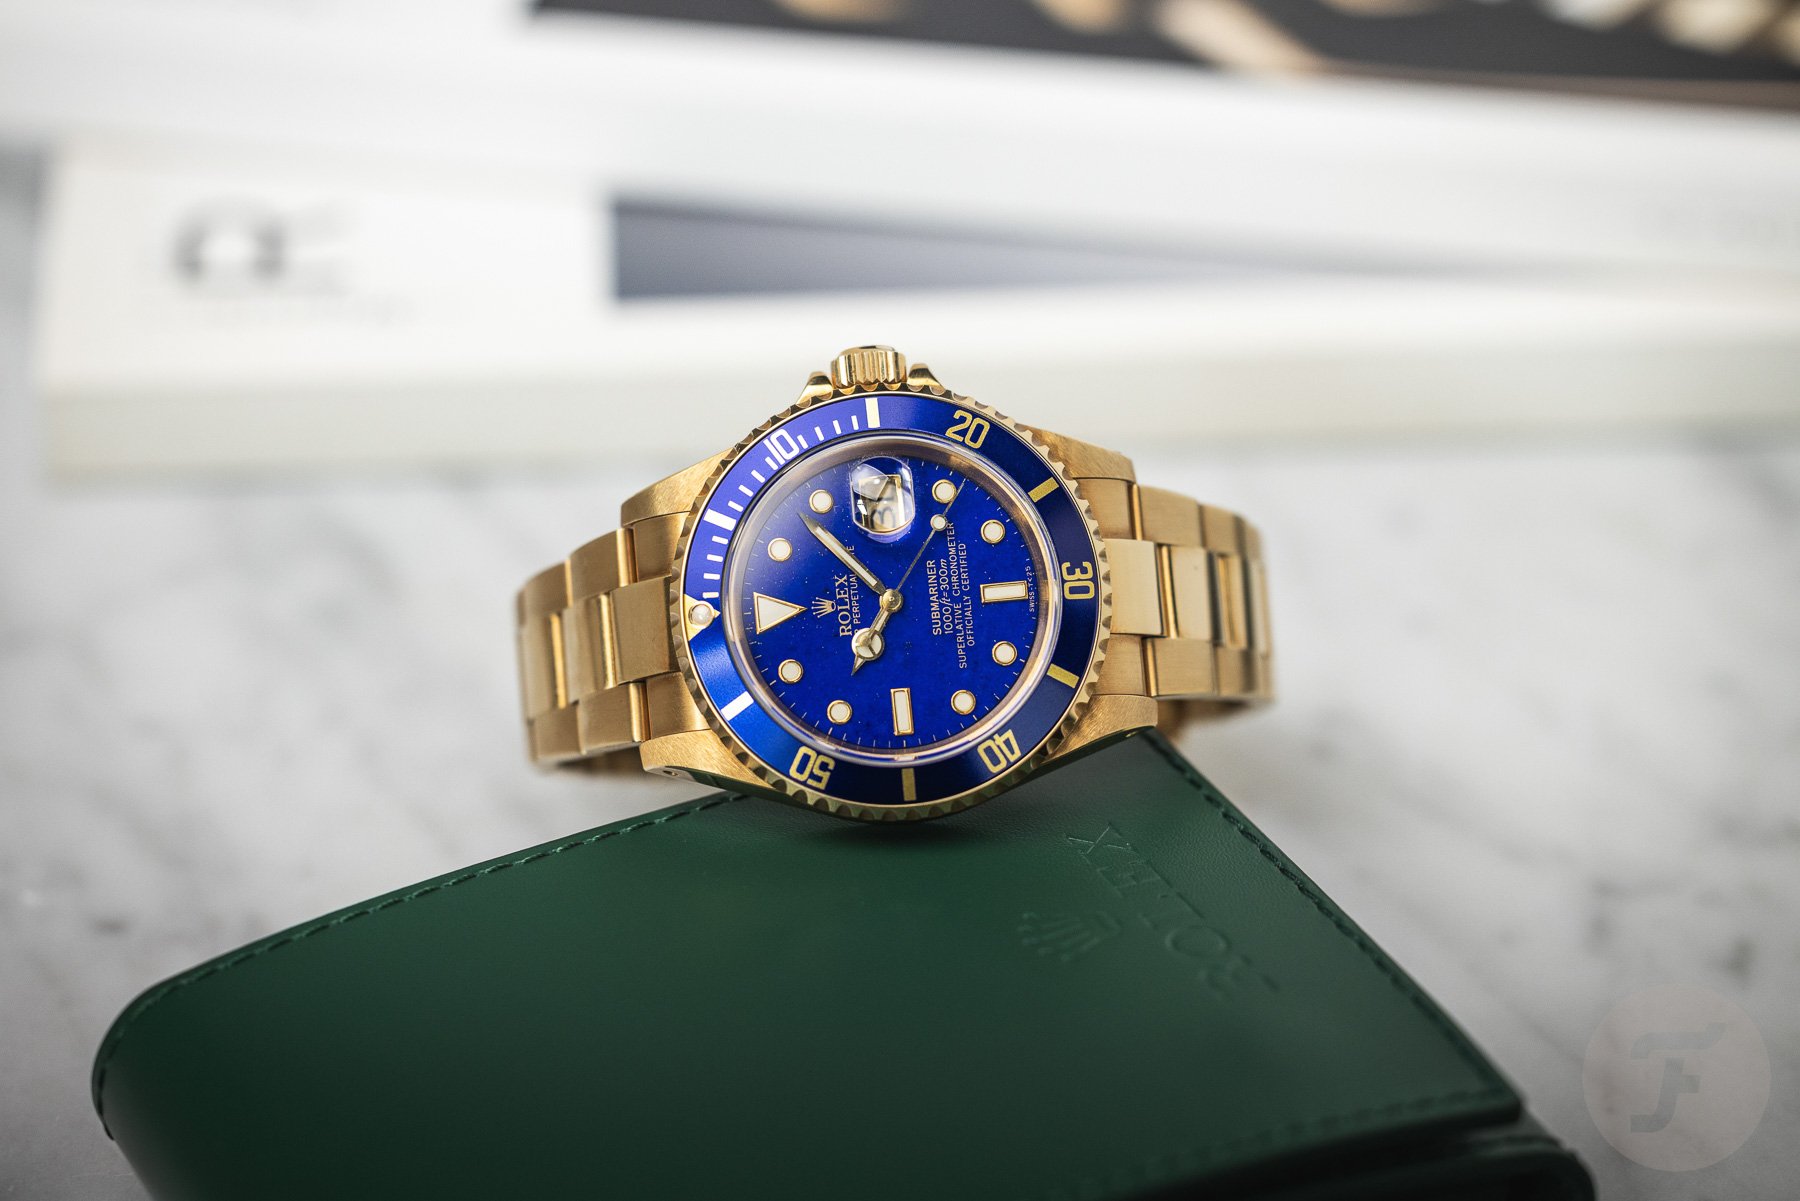 Could This Solid Gold Stone-Dialed Rolex Submariner 16618 Be My New Grail"